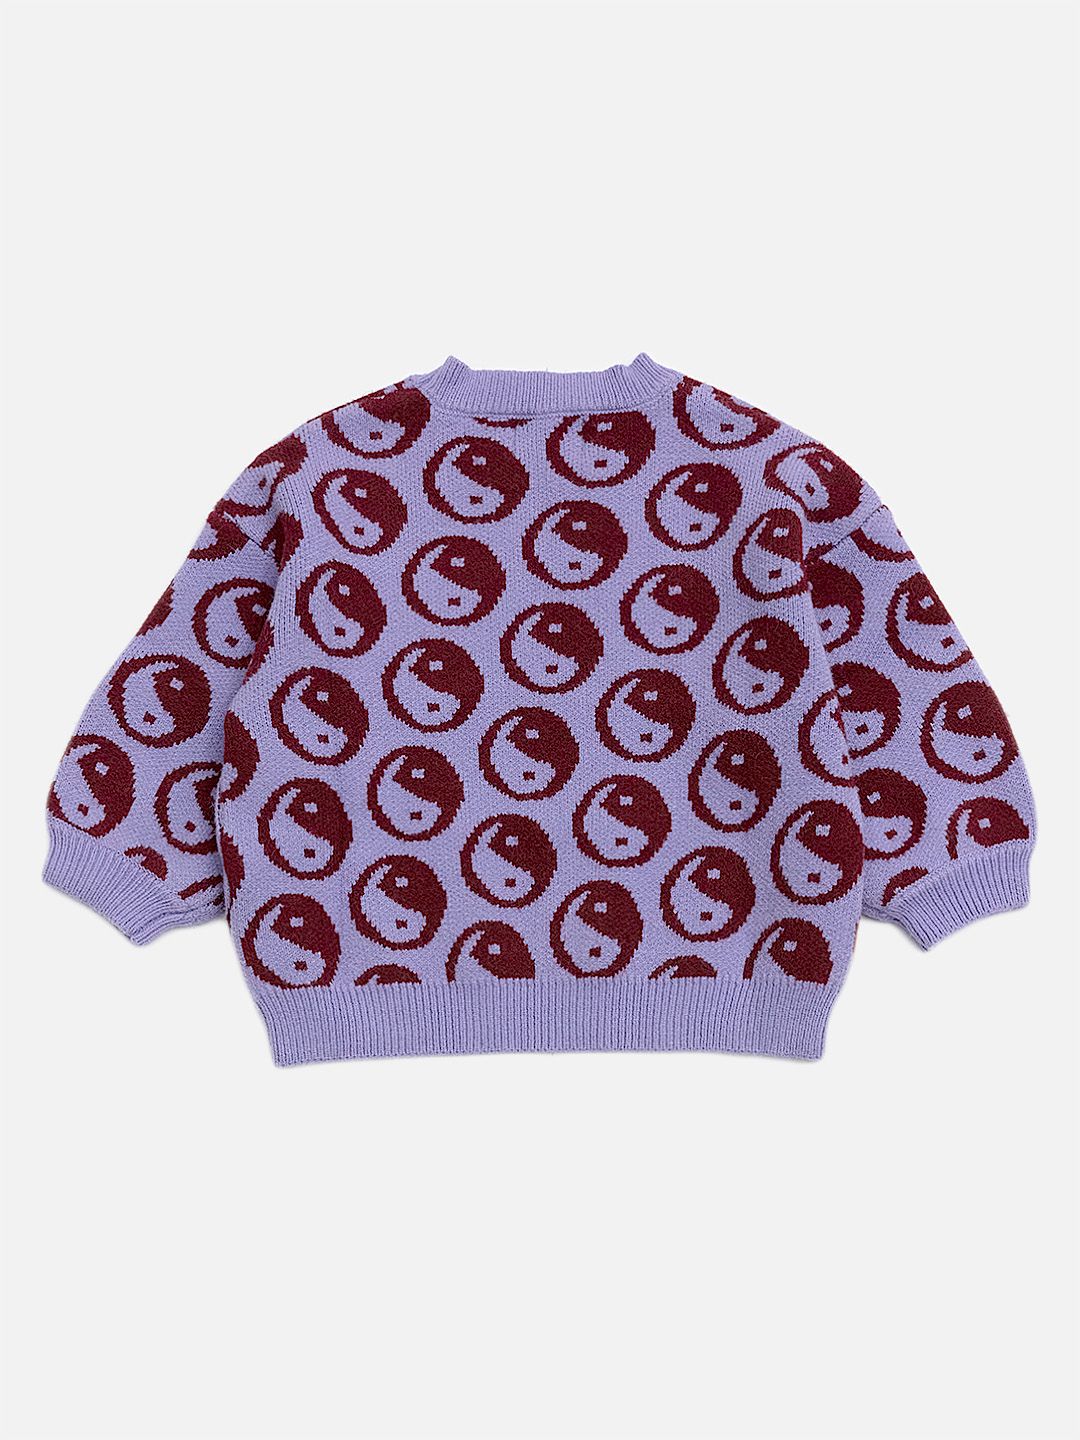 A kids' sweater with dark red yin and yang circles on a violet background, rear view